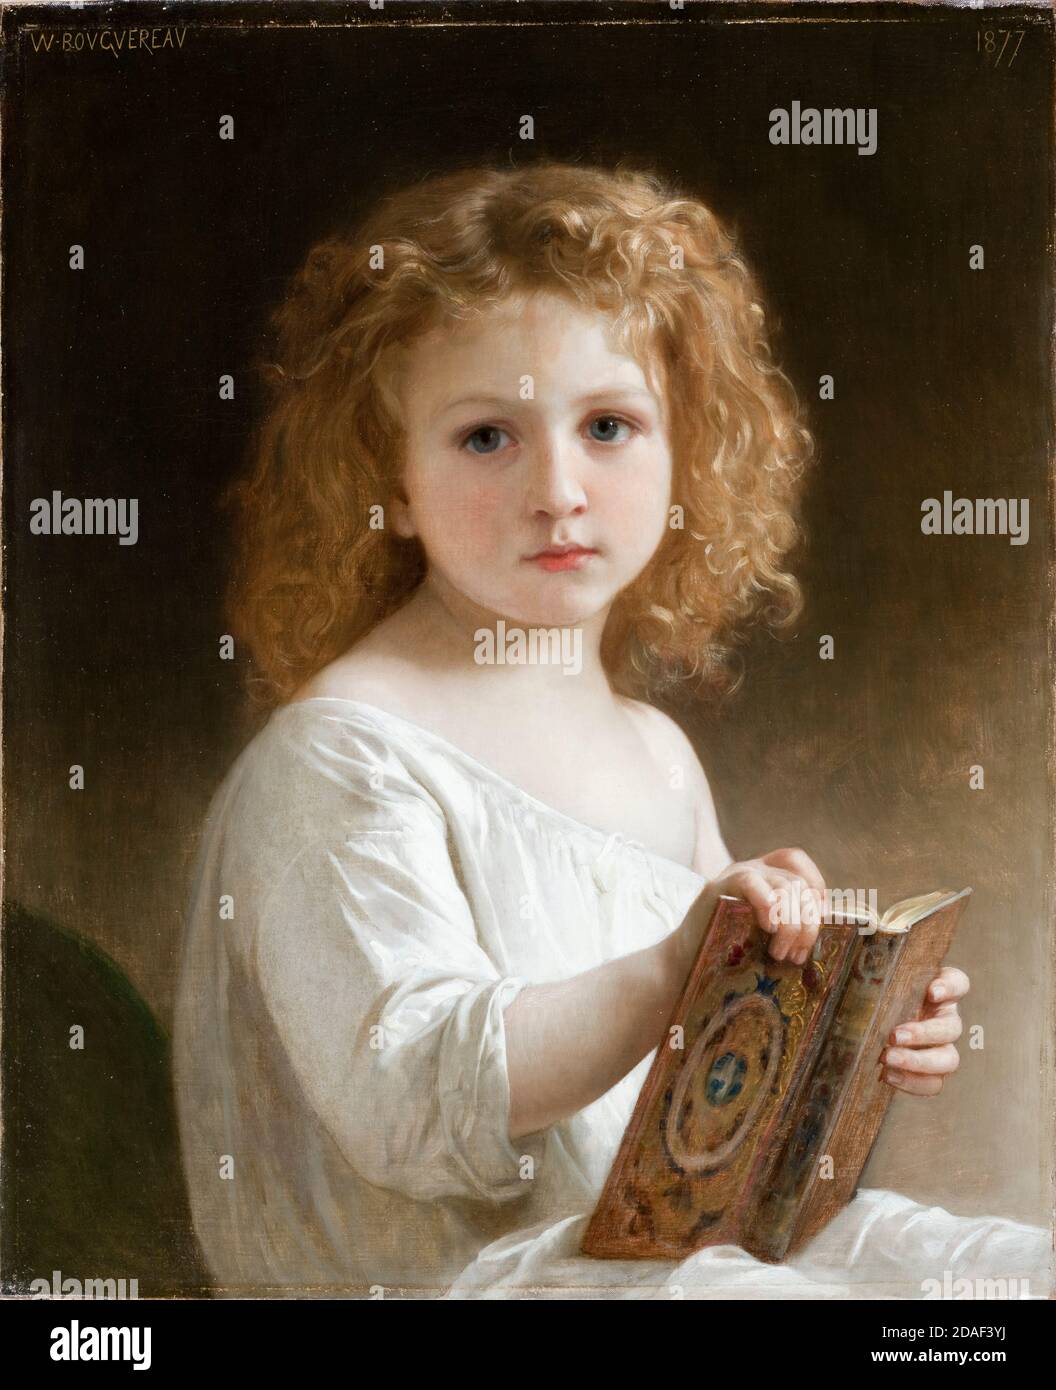 William Adolphe Bouguereau, The Story Book, painting, 1877 Stock Photo